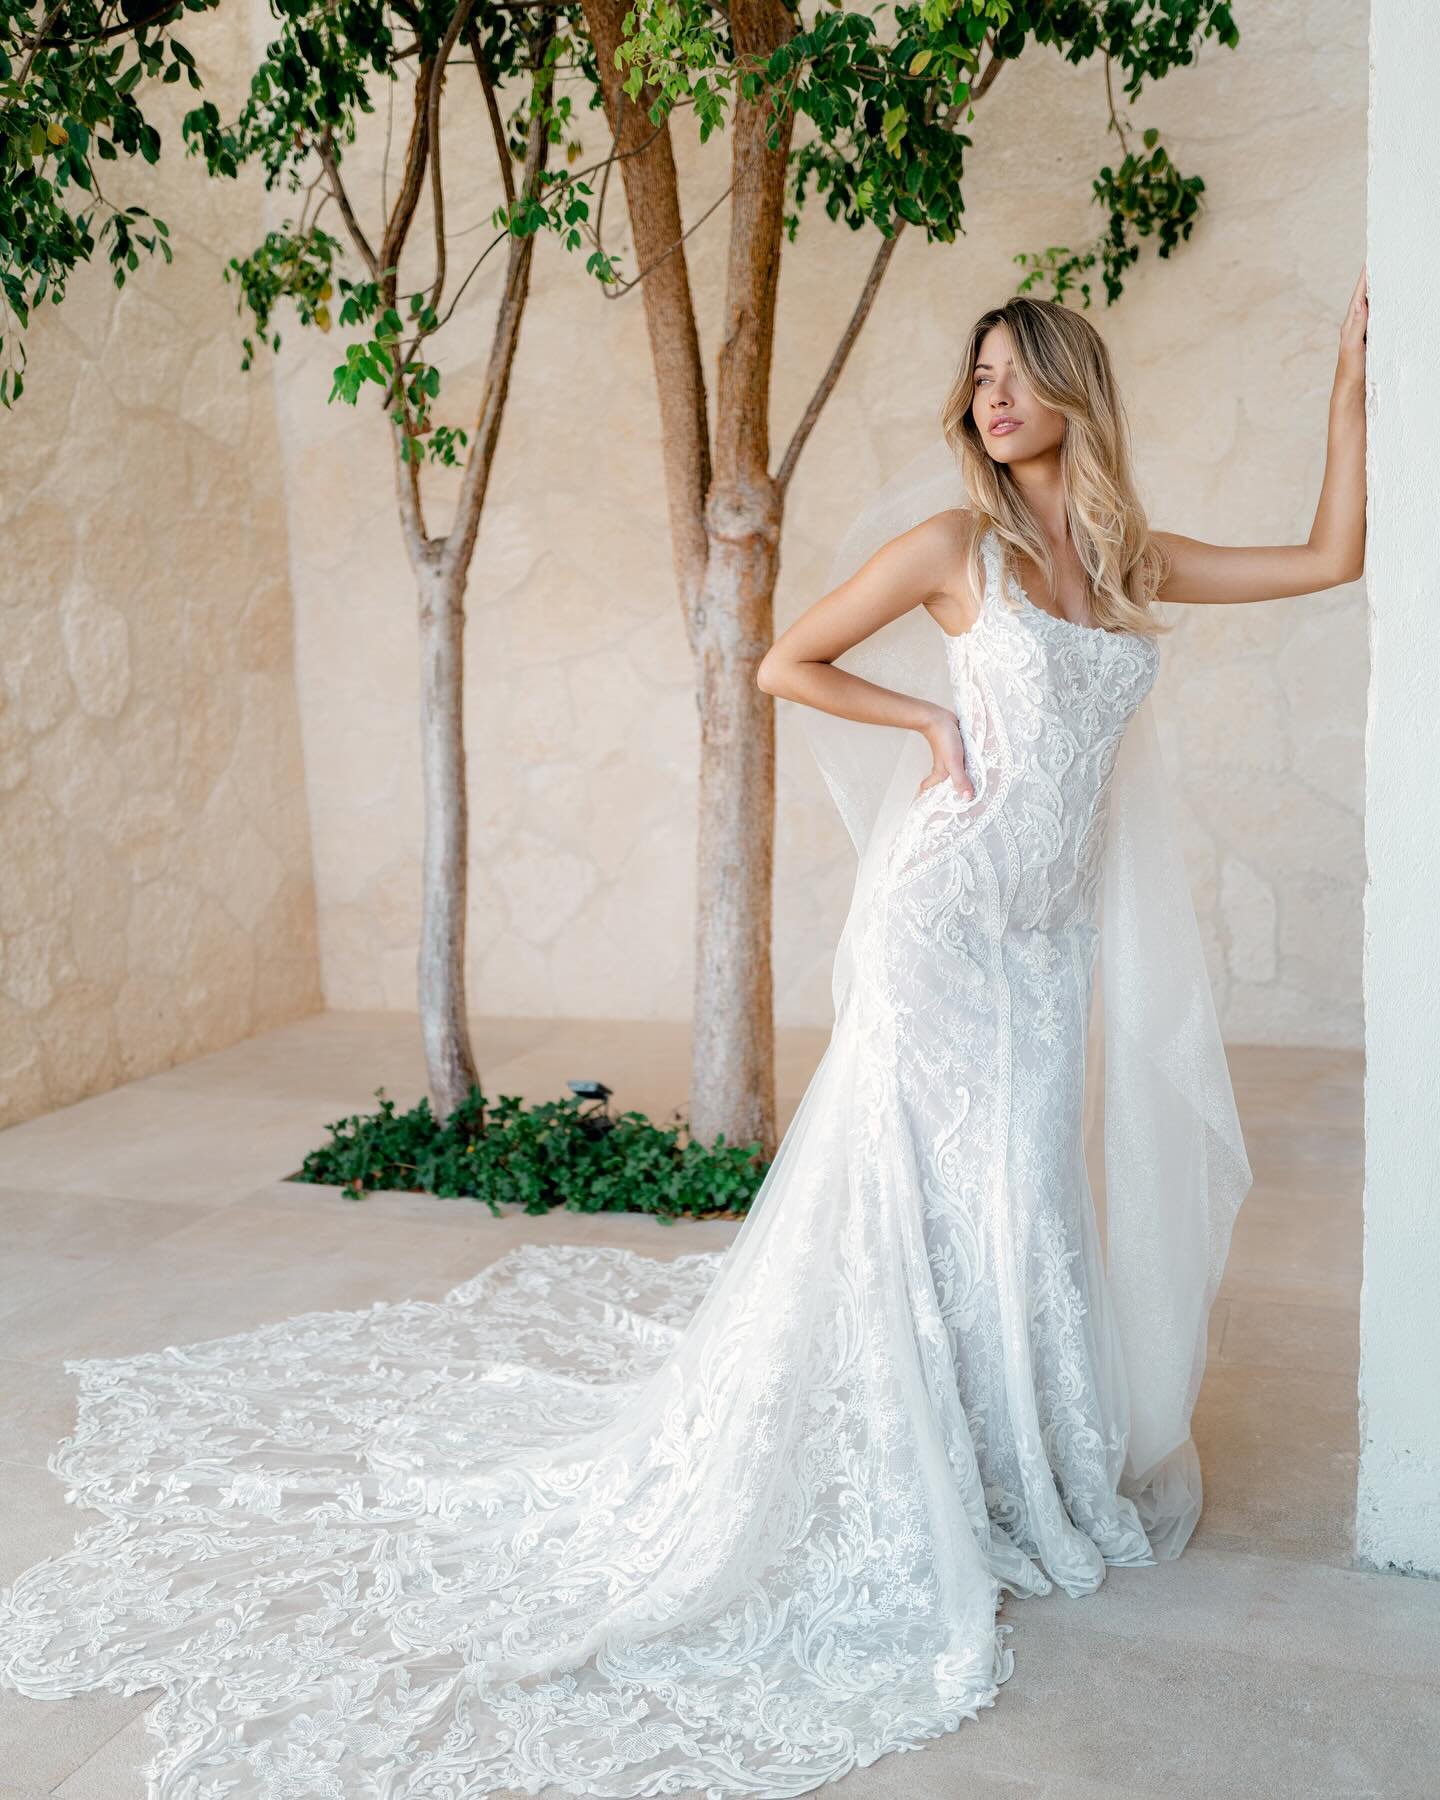 Five words: THE. BACK. OF. THIS. DRESS. 😍 

Casseen by @wtoowatters has some of the most stunning details EVER. This look, complete with sparkles, sheer side cutouts, and an absolutely gorgeous train, will have all eyes on you, all evening. 🤍

Is t